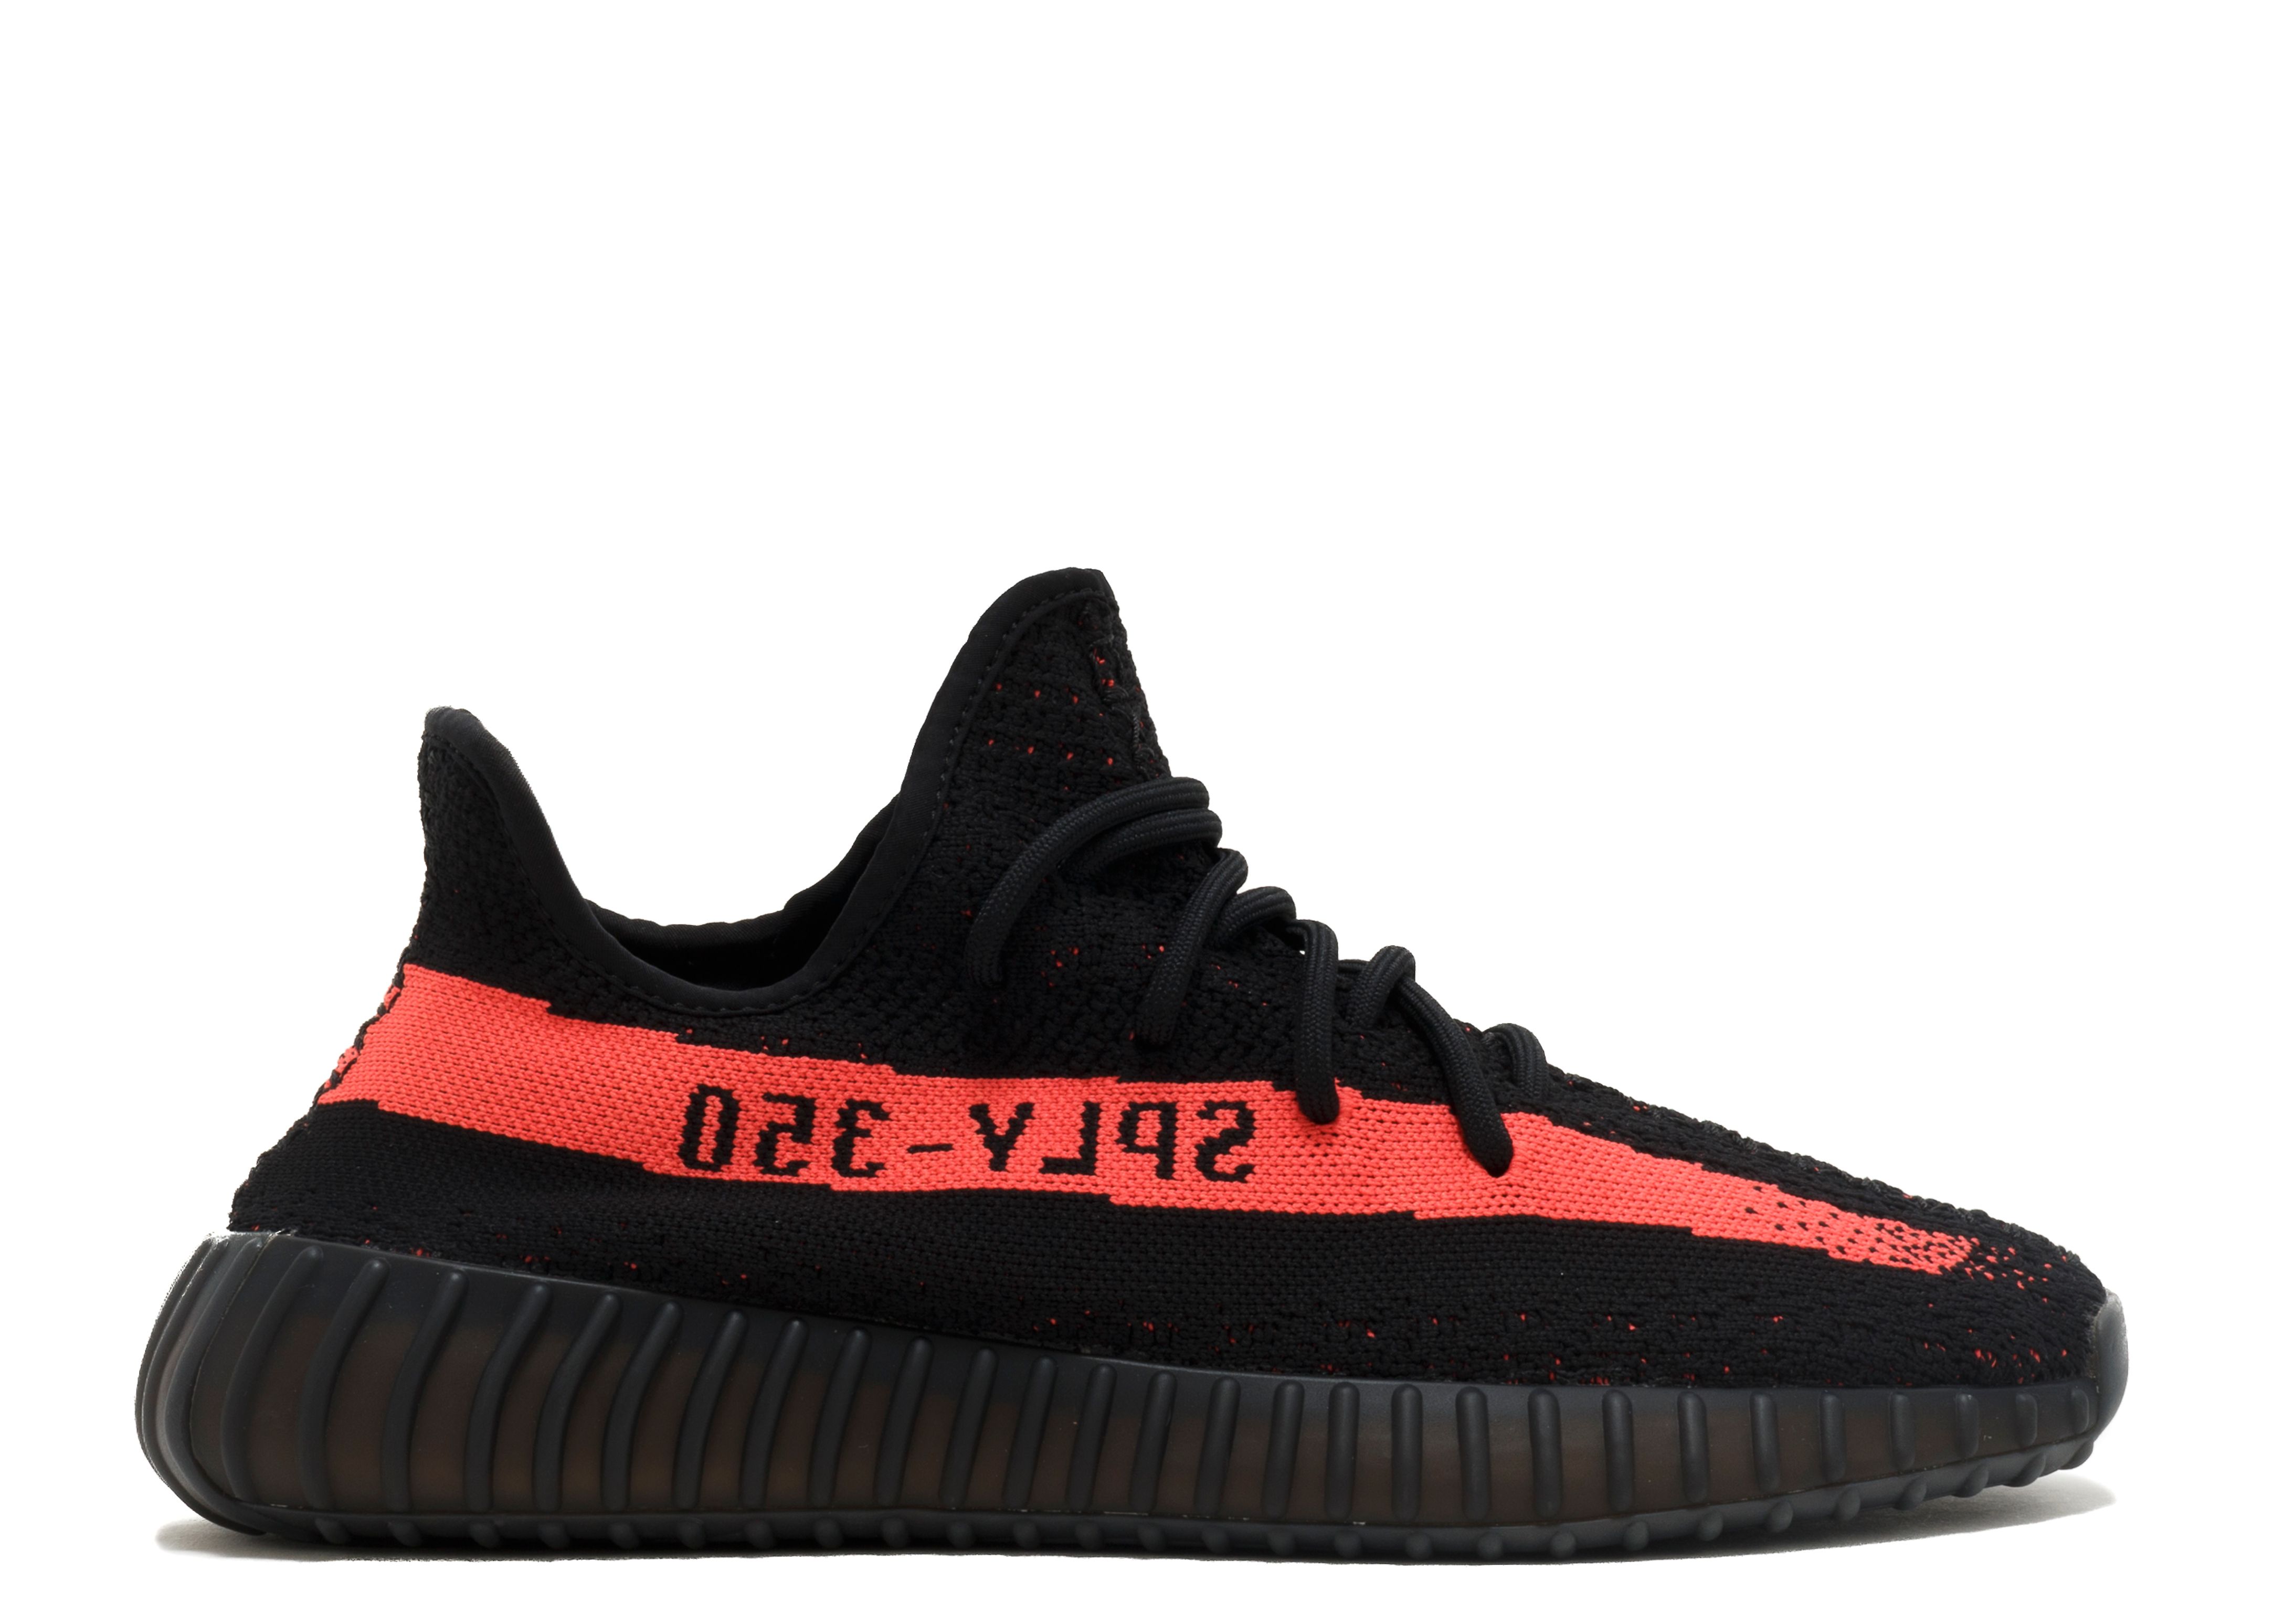 Ritual Indigenous tom Yeezy Boost 350 V2 'Red' - Adidas - BY9612 - core black/red/core black |  Flight Club